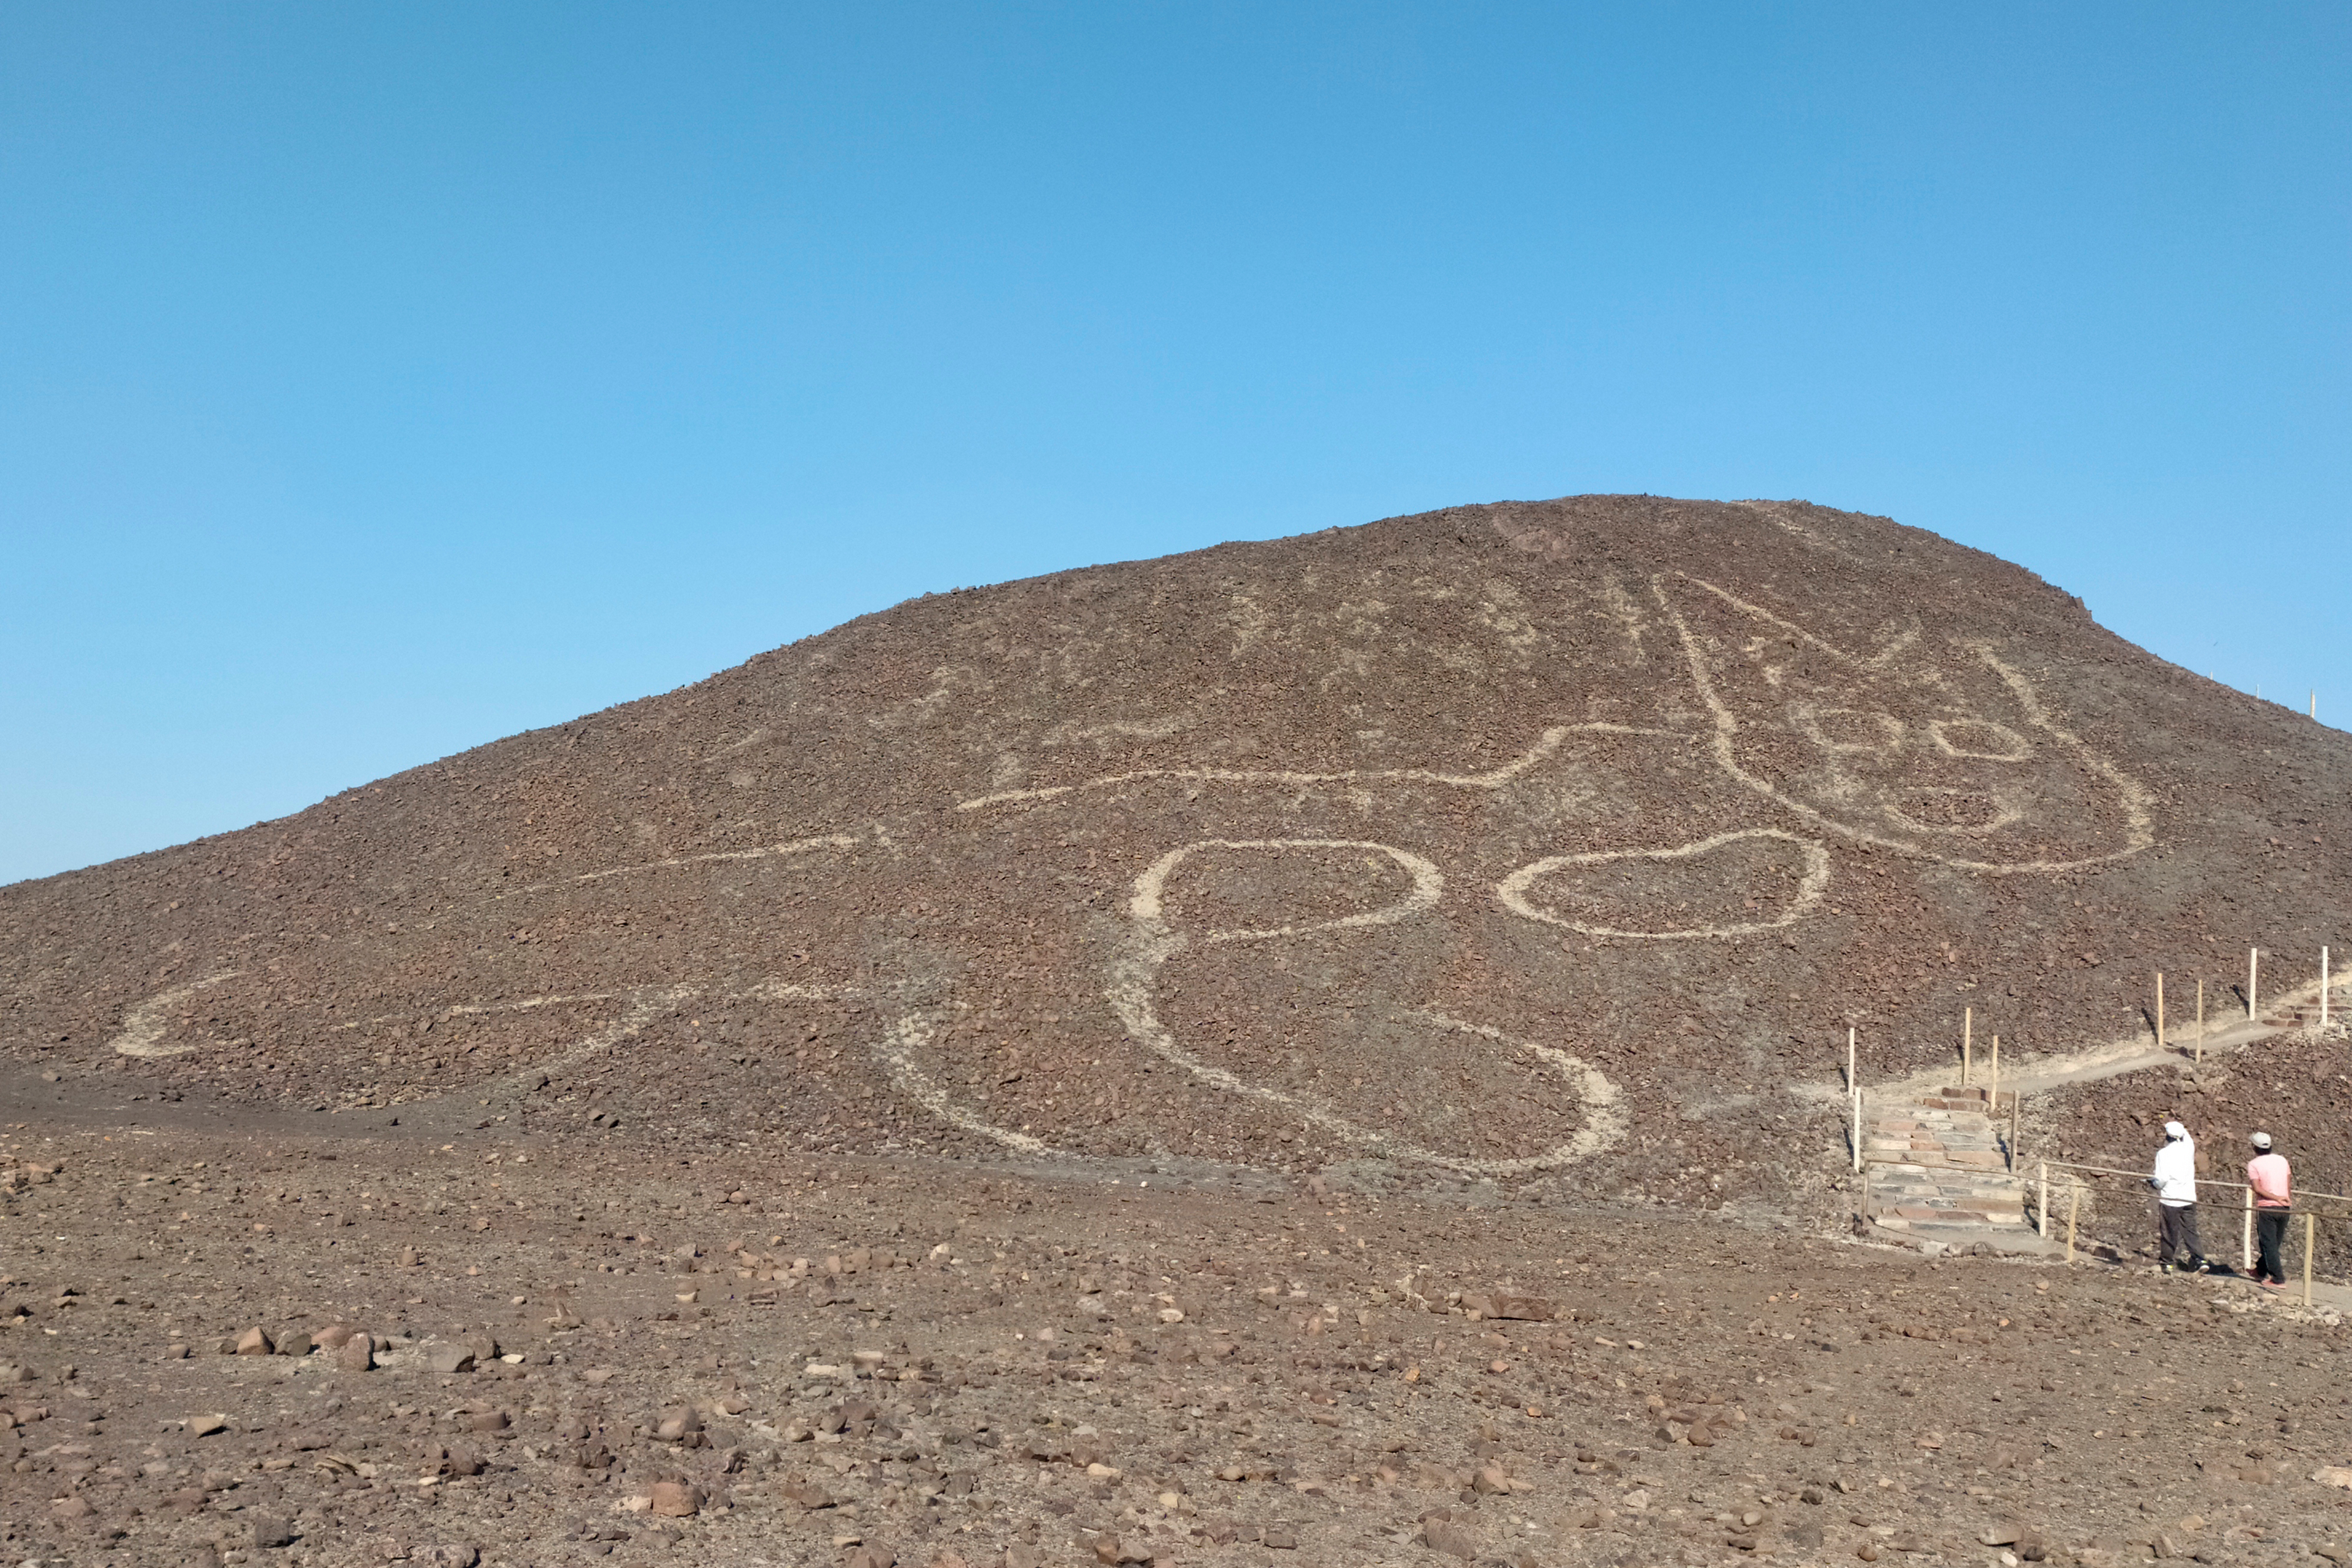 Scientists Discover 2,000-Year-Old Giant Cat Drawing Engraved Into Desert at Peru